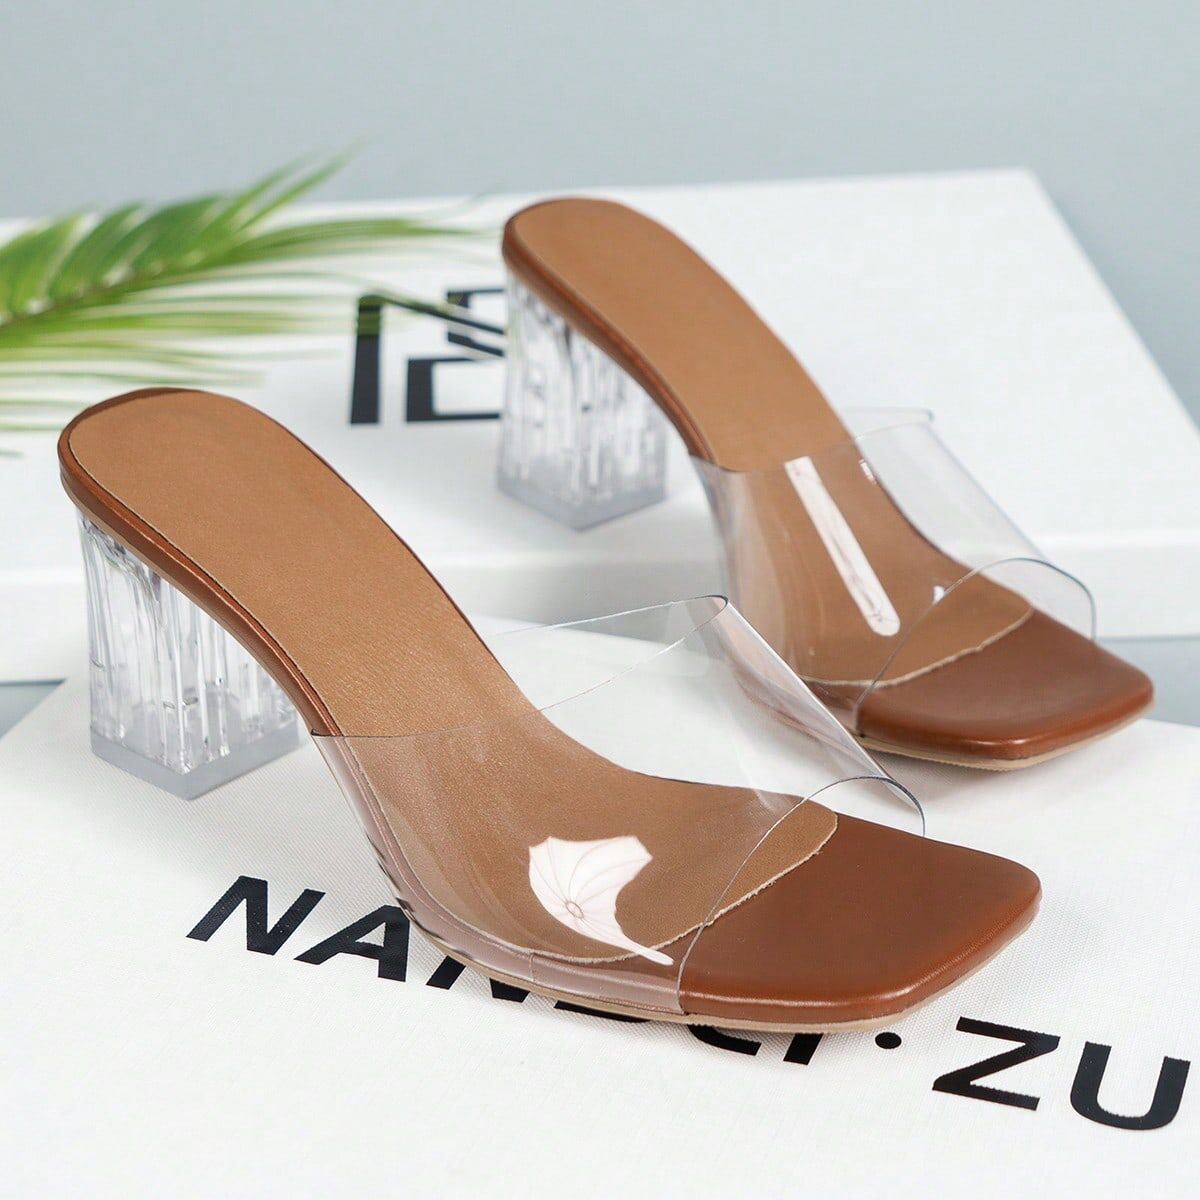 SHEIN Party & Vacation Season Promotions, Classic Elegant Women's High Heel Sandals With Crystal Heel, Square Toe, Chunky Heel, Transparent Strap & Decorative Design For All Seasons In Coffee Brown Color Coffee Brown CN35,CN36,CN37,CN38,CN39,CN40,CN41,CN4